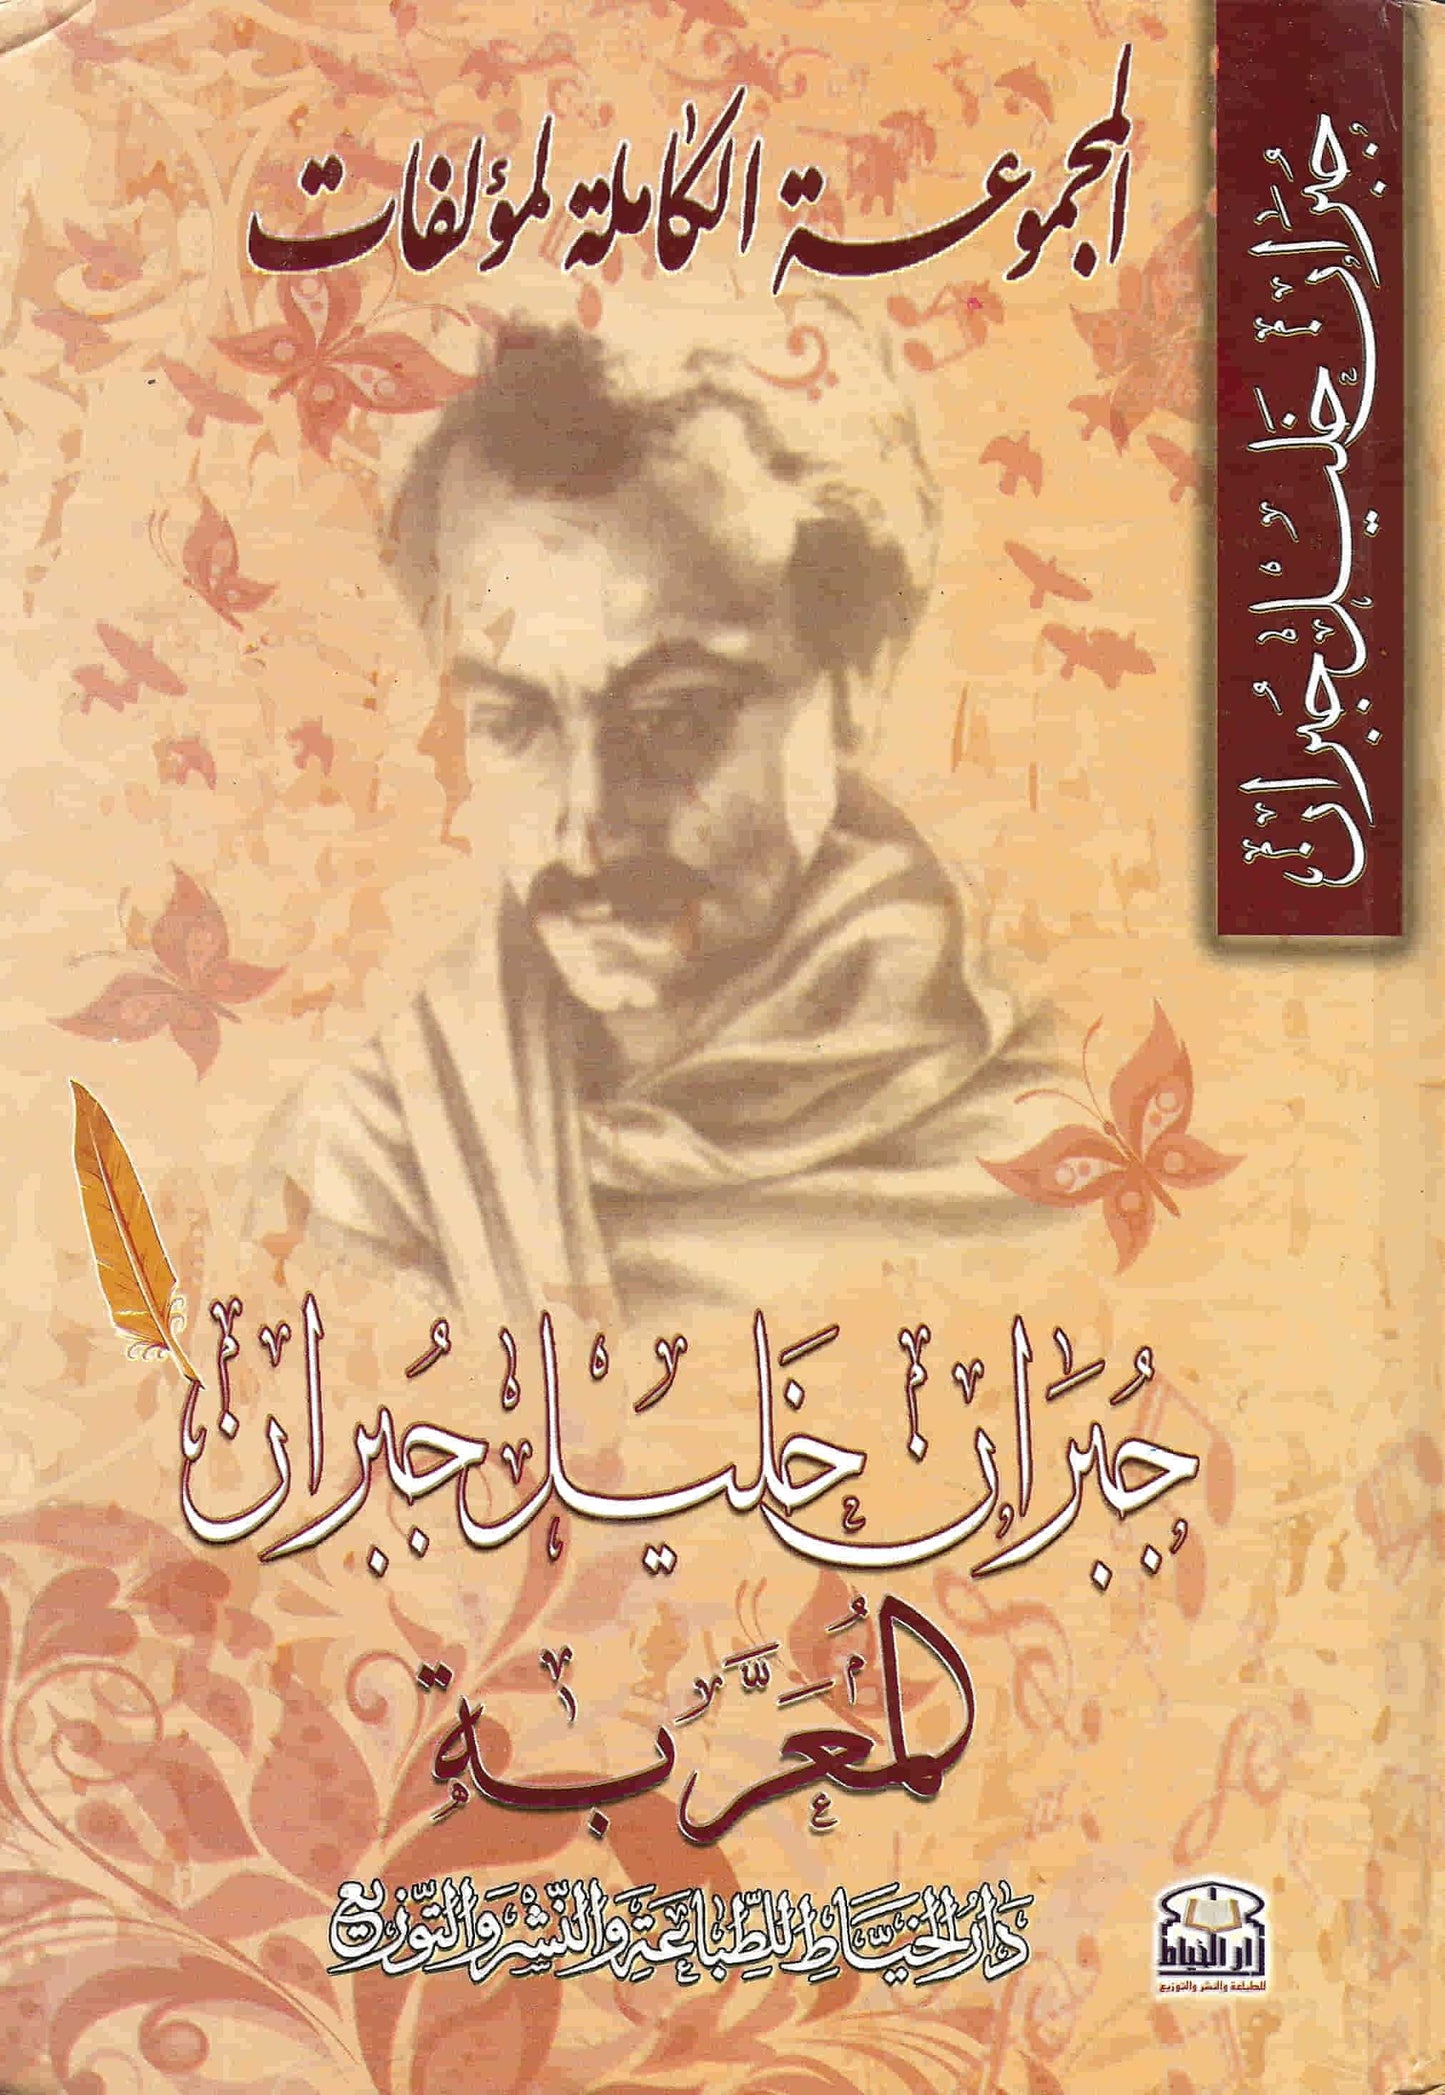 The complete collection of Gibran Khalil Gibran's Arabic and Arabic works